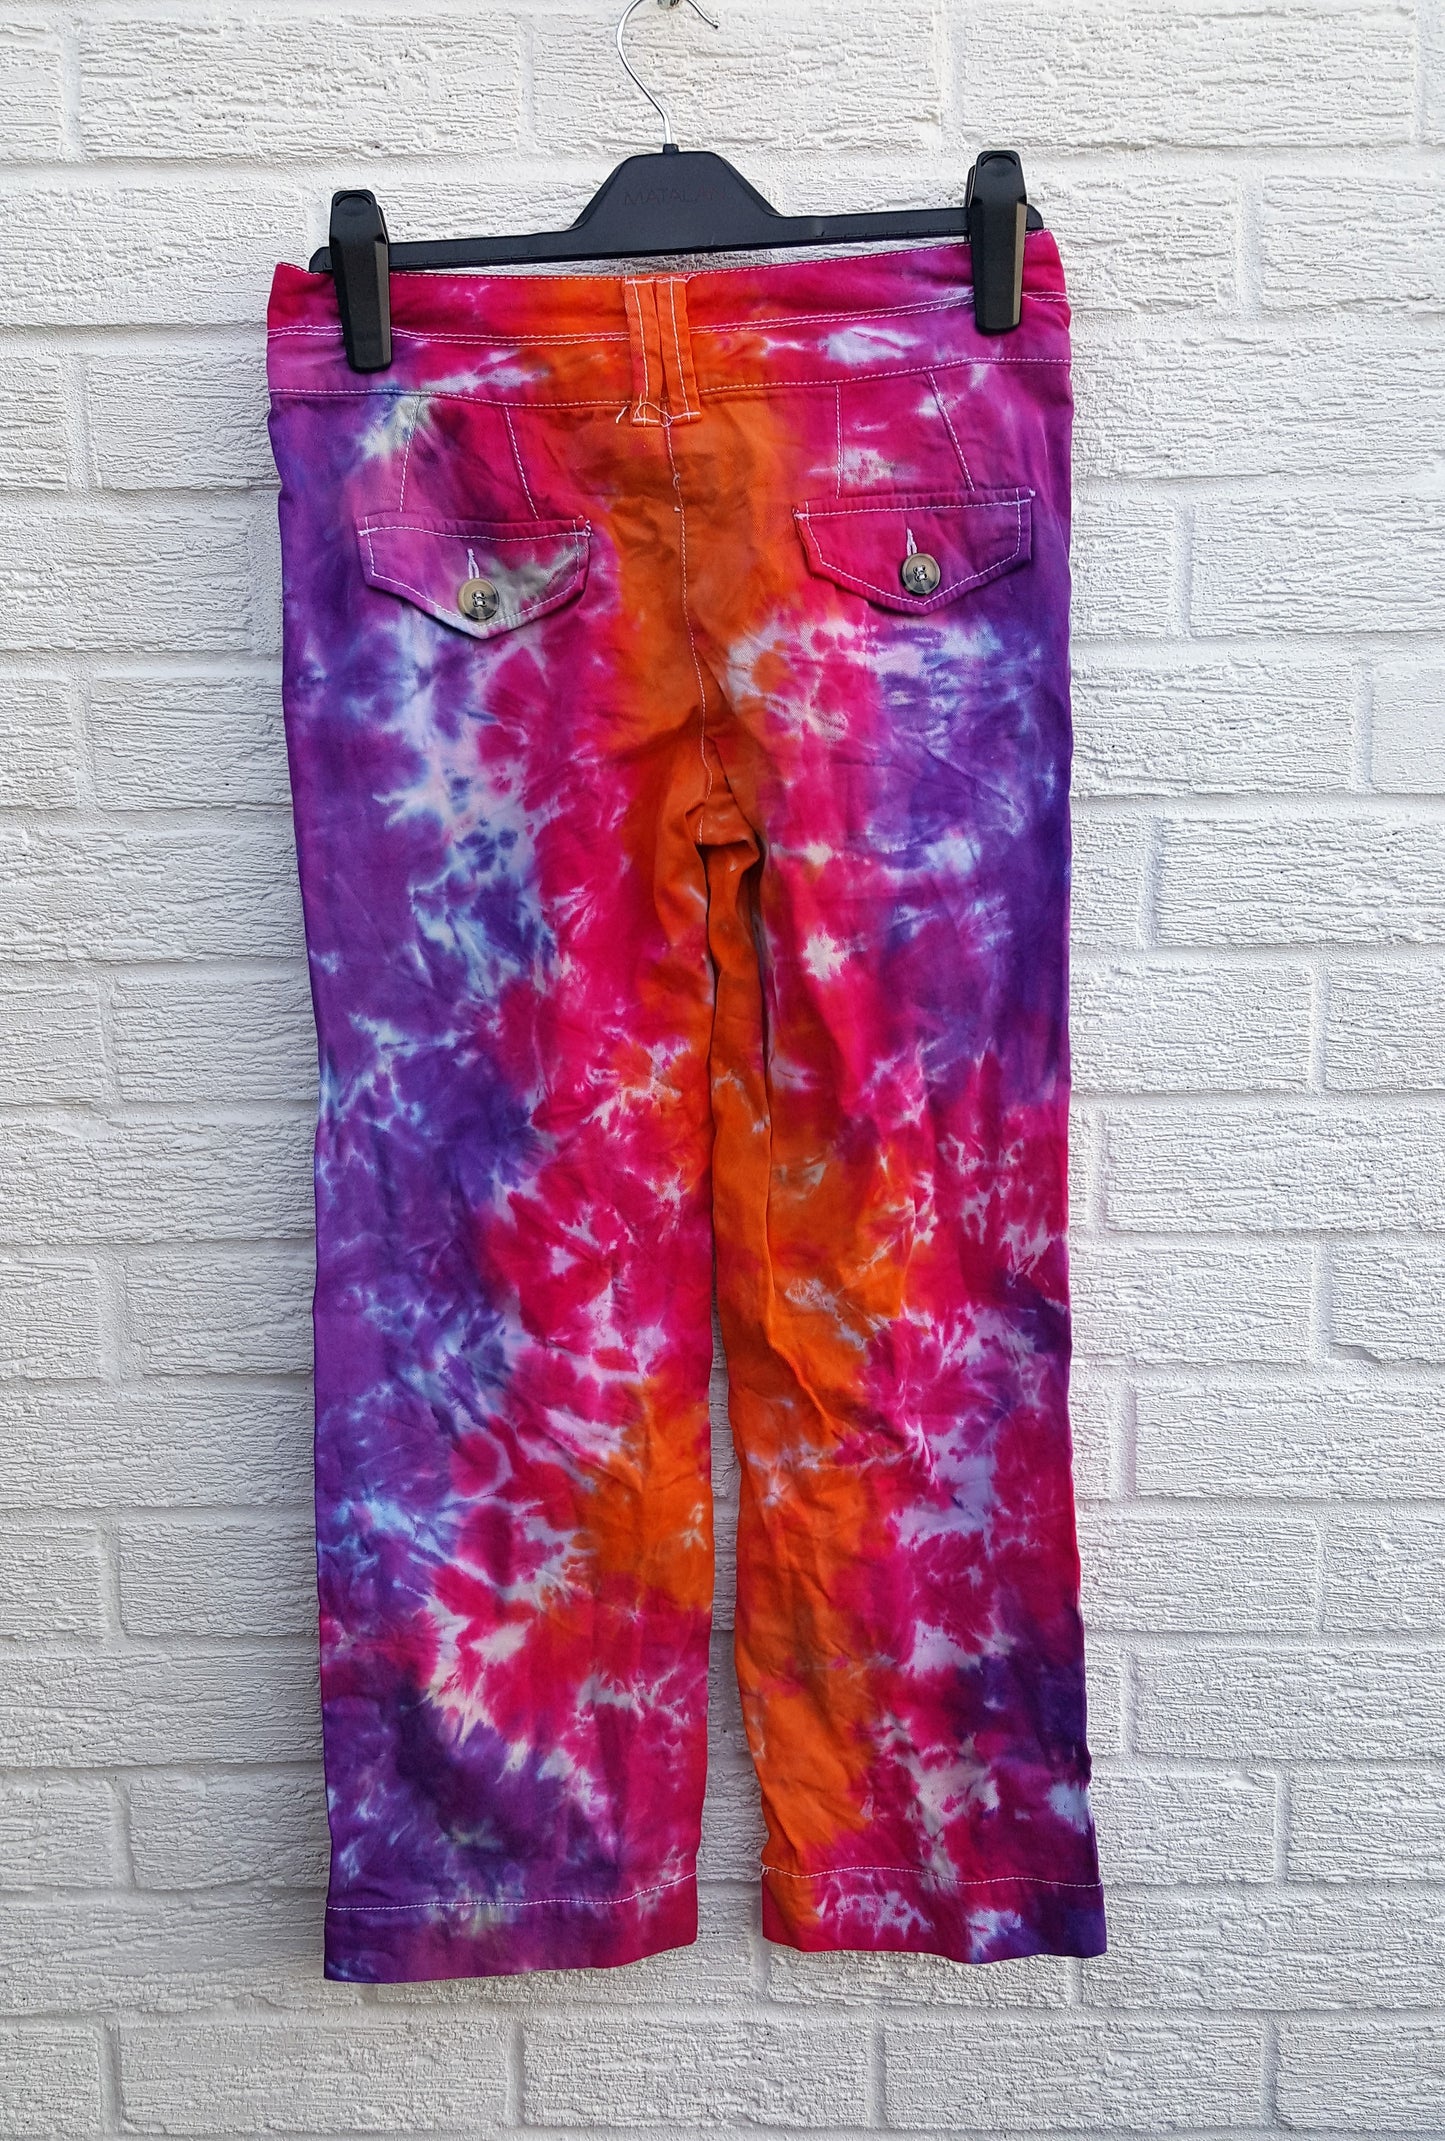 Tie dye trousers, in bright orange, pink and purple shades - perfect for the hippie at heart! In 100% Cotton to fit UK size 6R or US size 2.  These trousers were thrifted and upcycled using cold water, eco reactive dyes, so they're not just unique, they're friendlier to the environment too.  Hand dyed with love by AbiDashery.  We only use recycled and compostable packaging!